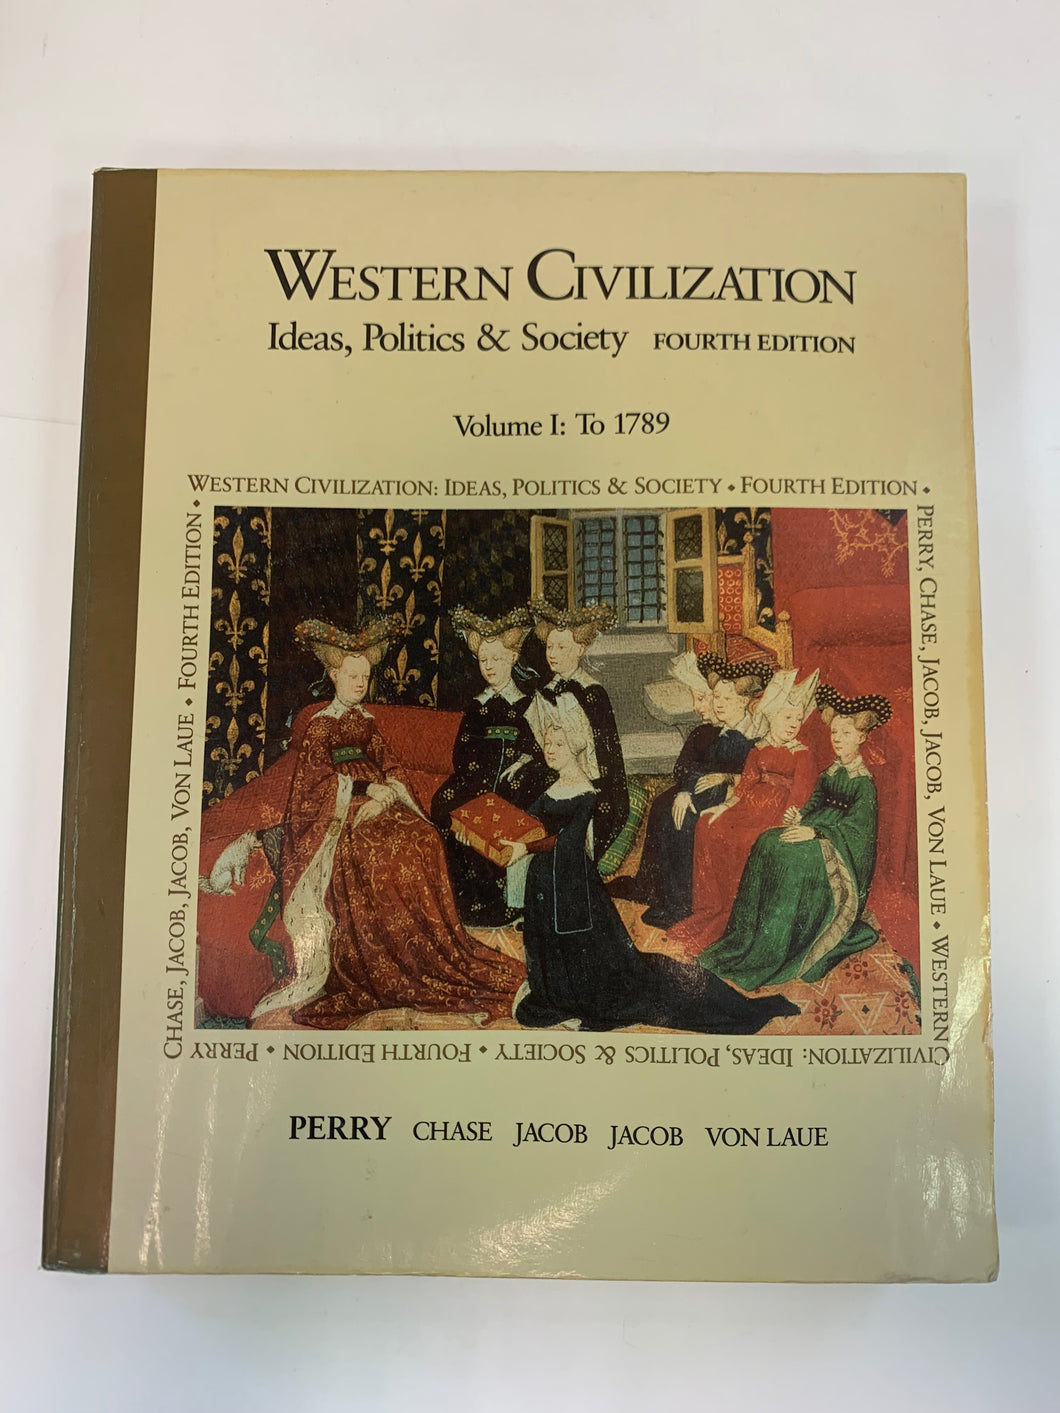 Western Civilization: Ideas, Politics & Society by Marvin Perry